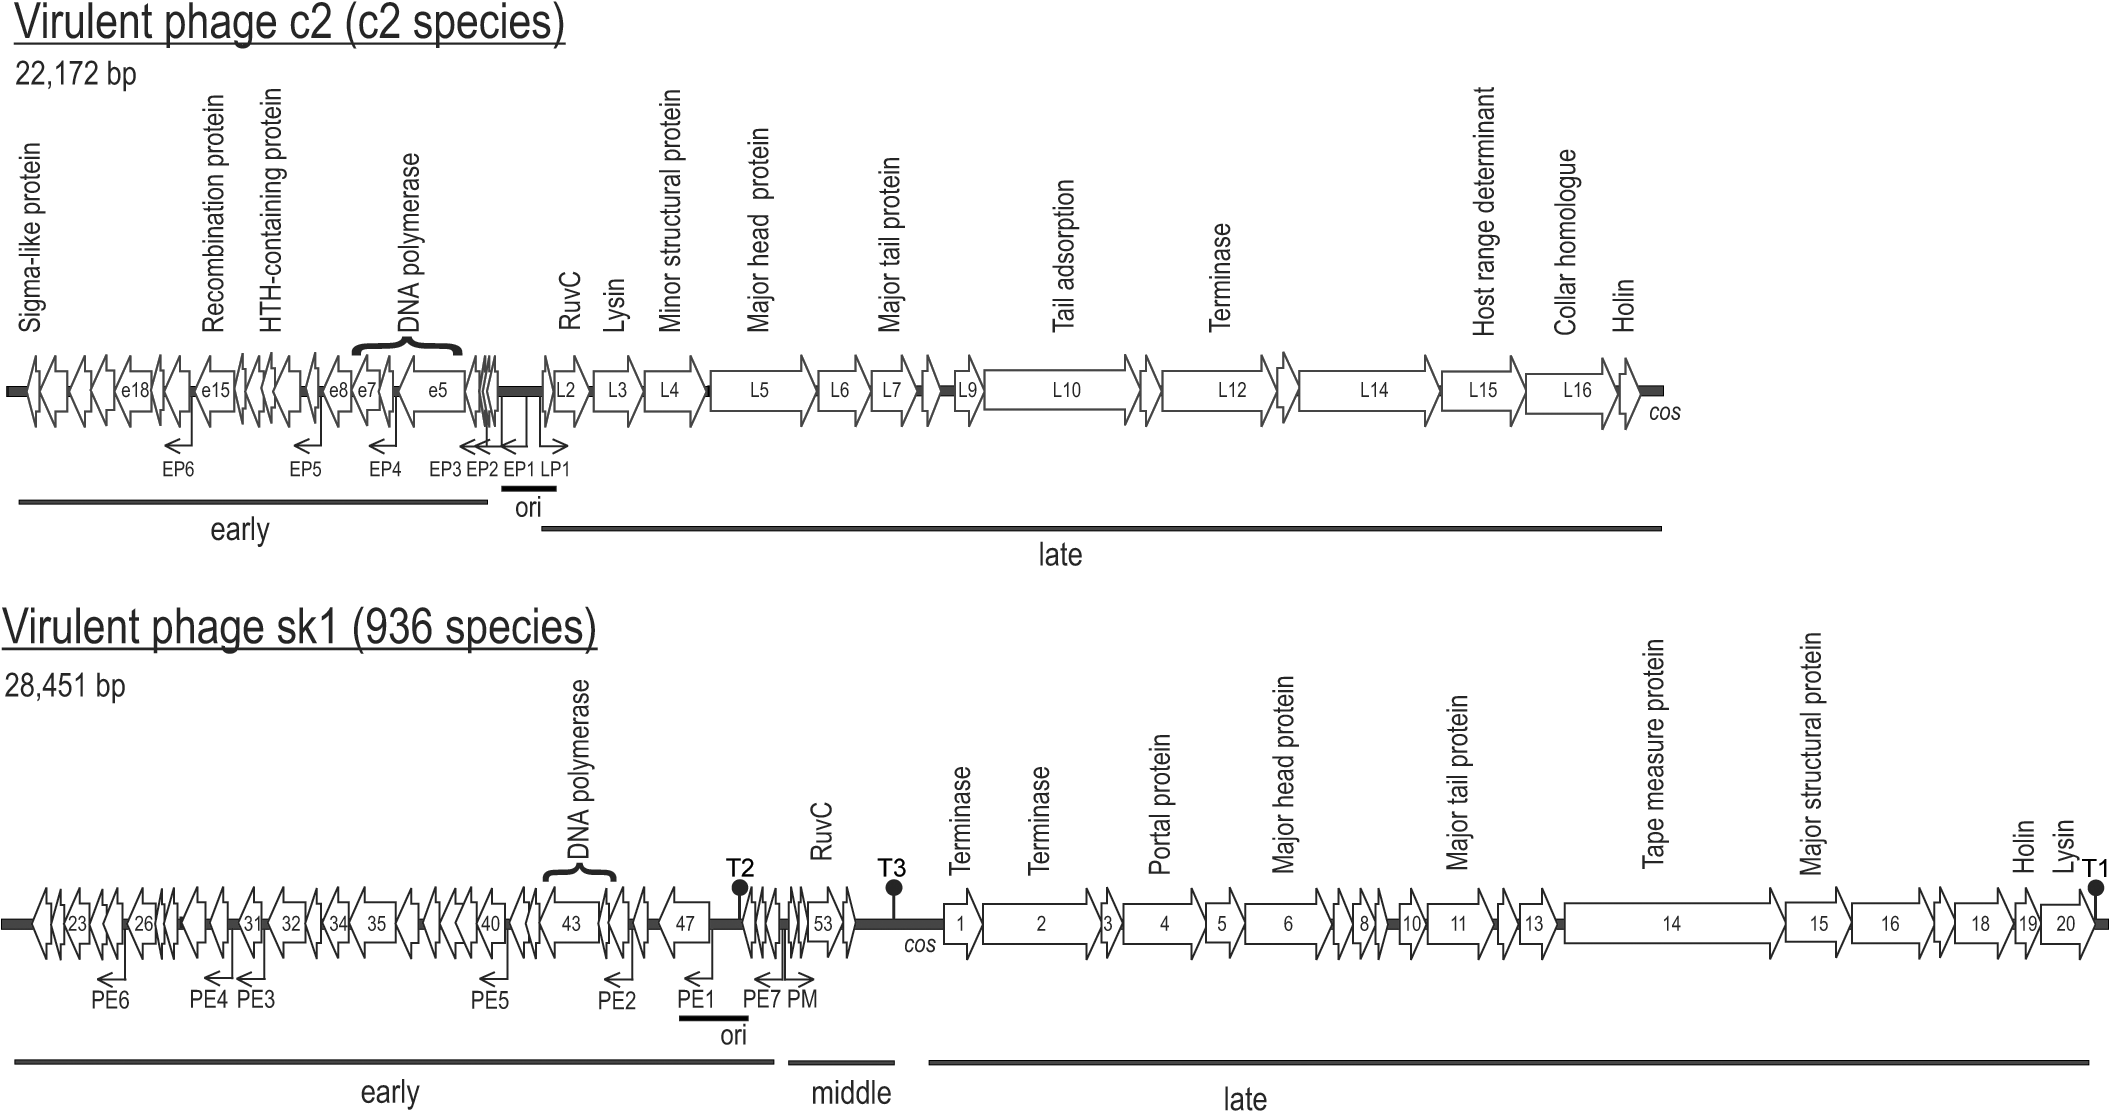 Figure 36-1: Genome organization of virulent phages c2 and sk1. The DNA sequence of c2 is obtained from (71), accession number L48605, while the DNA sequence of phage sk1 is obtained from (27), accession number AF011378. Arrows indicate the size and direction of transcription of open reading frames. Assigned functions are written above the open reading frames. Identified and putative promoters are indicated as small black arrows, while origins of replication are shown as a black box below the ORFs. The location of cos sites are indicated. Regions of the genome transcribed early, middle, or late in the infection cycle are marked with black lines below the genome.